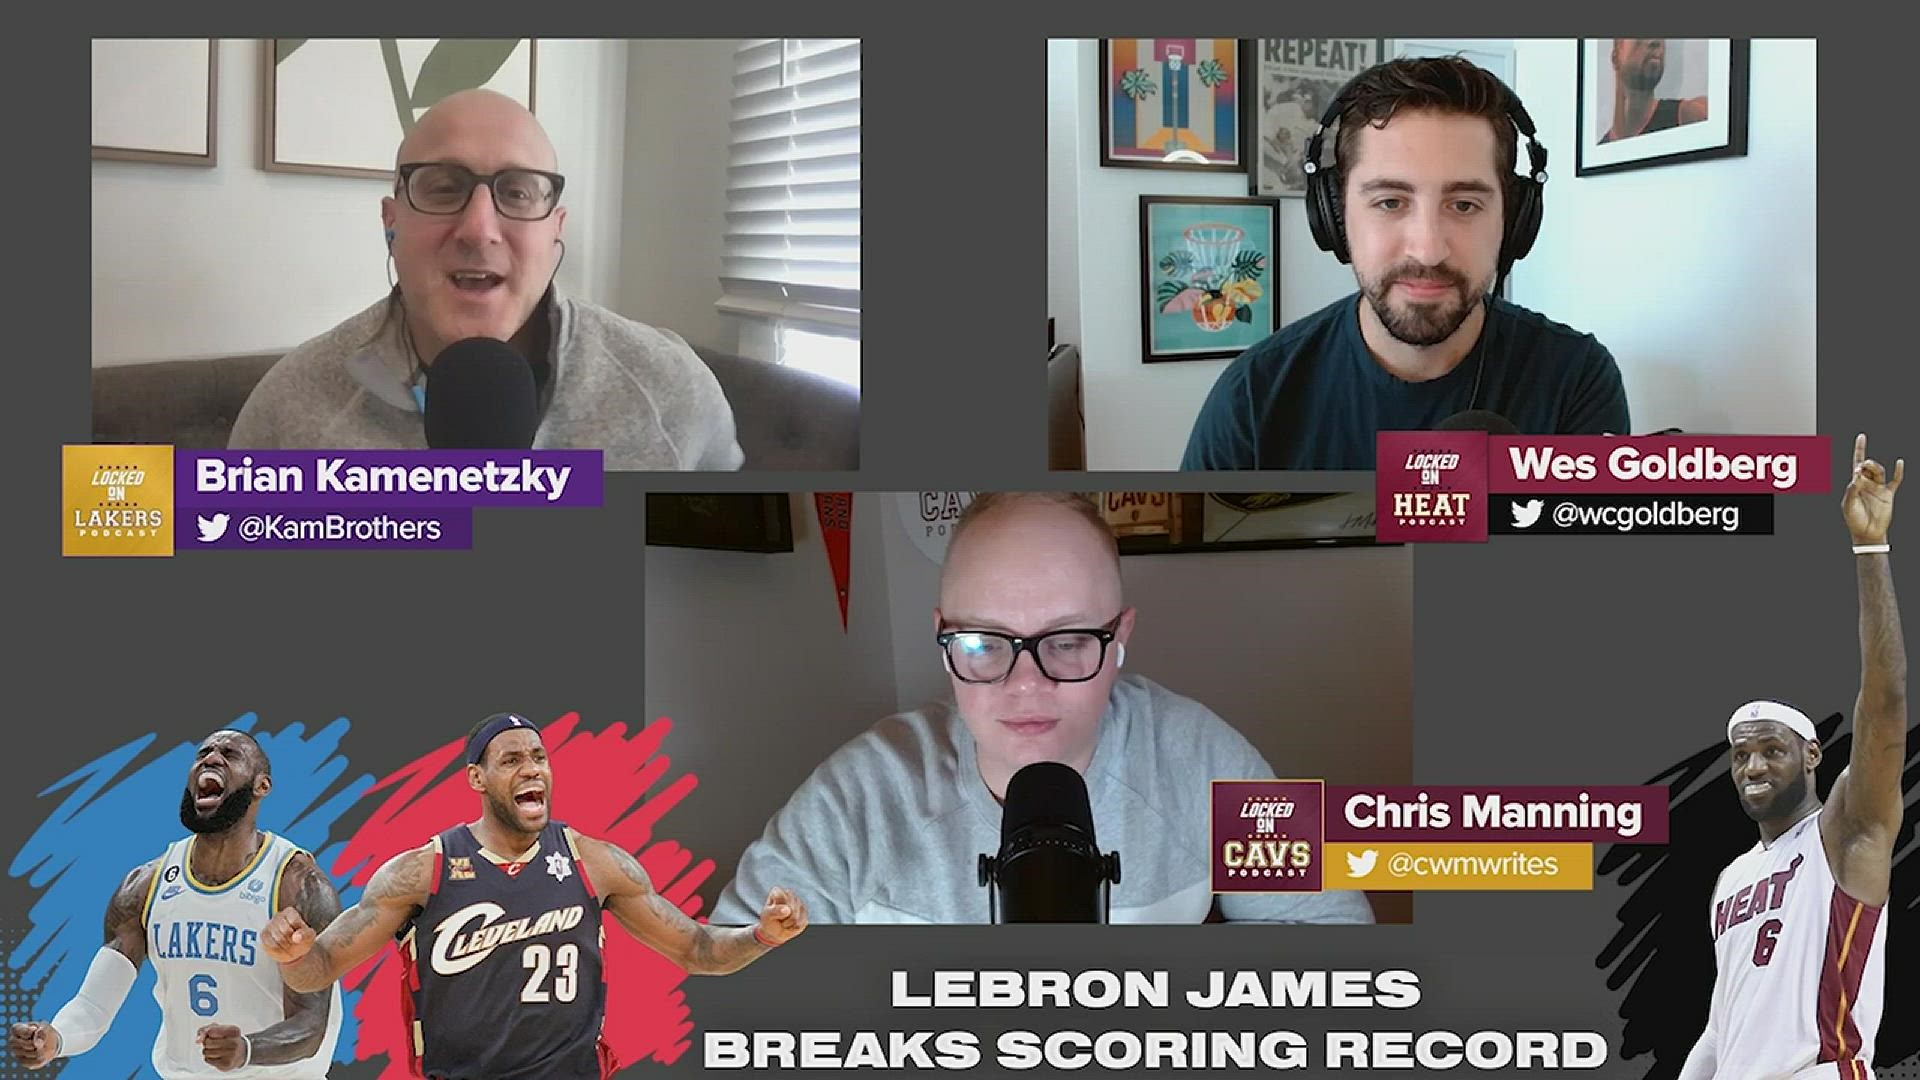 LeBron James has broken the NBA’s Scoring Record by passing Kareem Abdul-Jabbar. Locked On hosts covering the Lakers, Heat, and Cavaliers react to Lebron’s record.